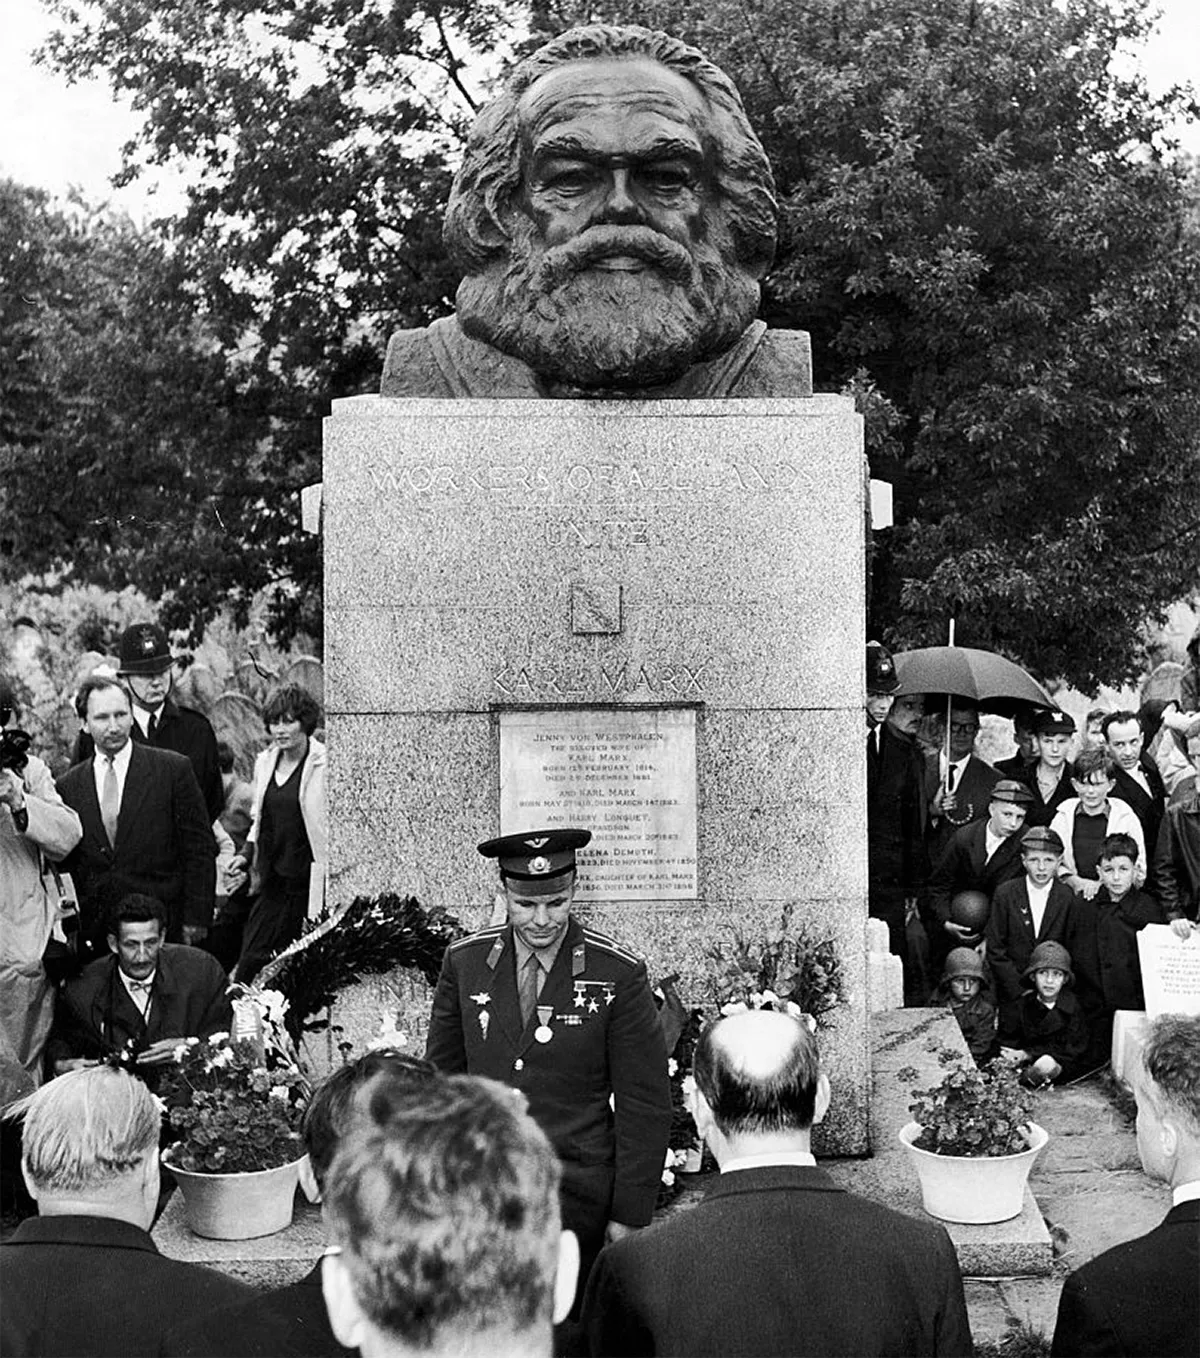 Yuri Gagarin lays a wreath on the grave of Karl Marx at London’s Highgate Cemetery, 14 July 1961. Photo by Harlow, Eric/Mirrorpix/Mirrorpix via Getty Images.